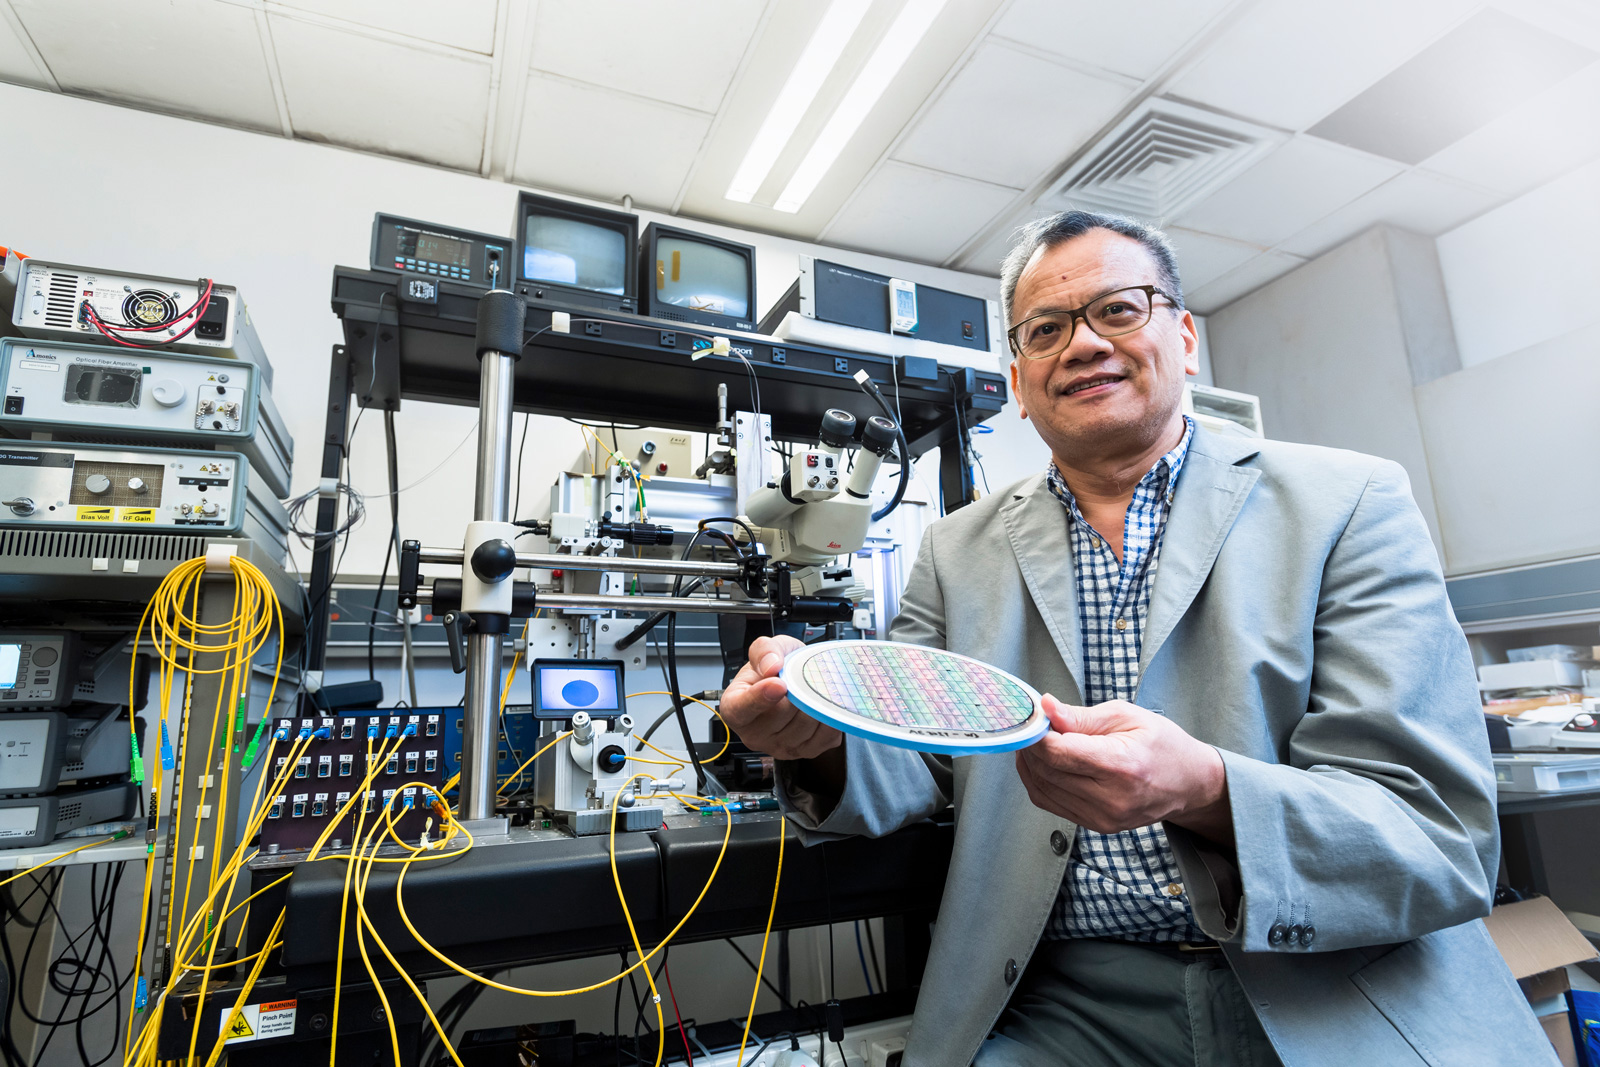 Dr Chu Sai-tak works on the design and fabrication of the chips which contribute to the fastest internet speed in the world.